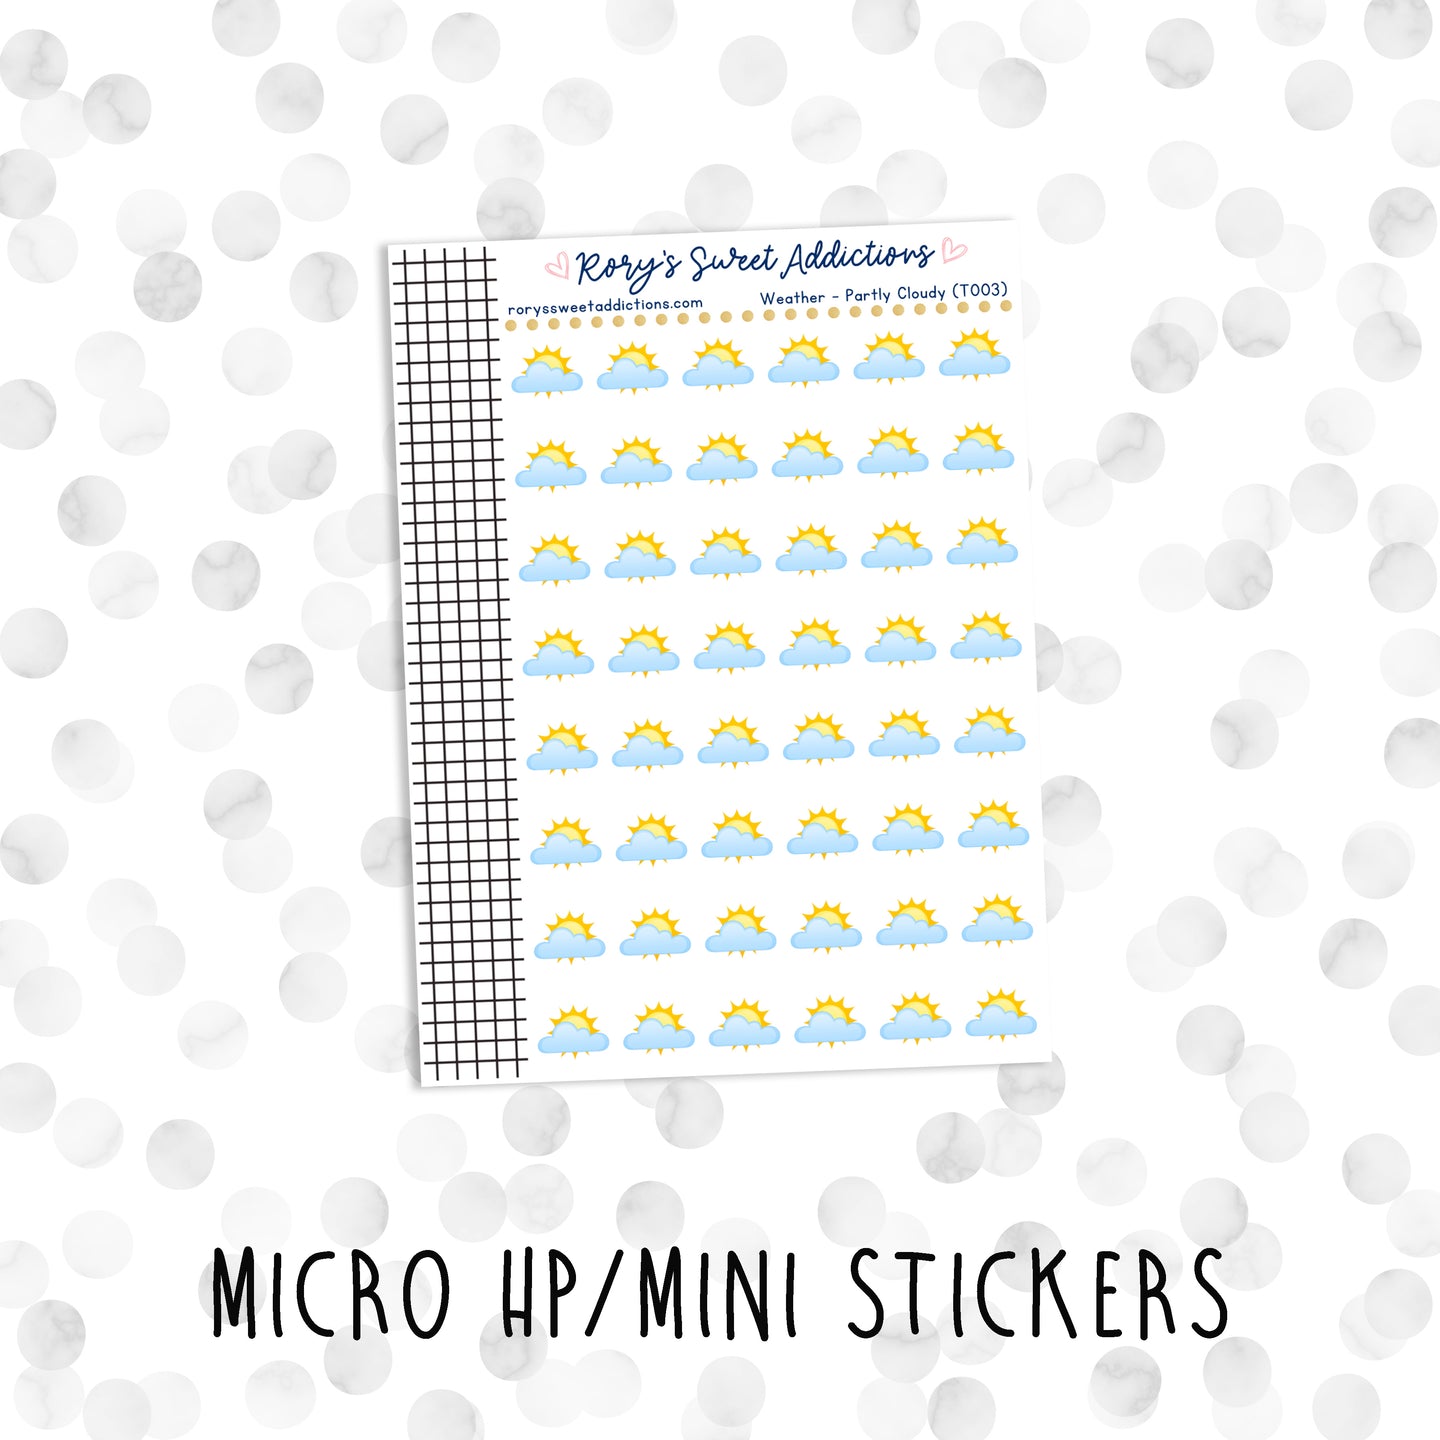 Weather - Partly Cloudy // Micro HP - Mini Stickers